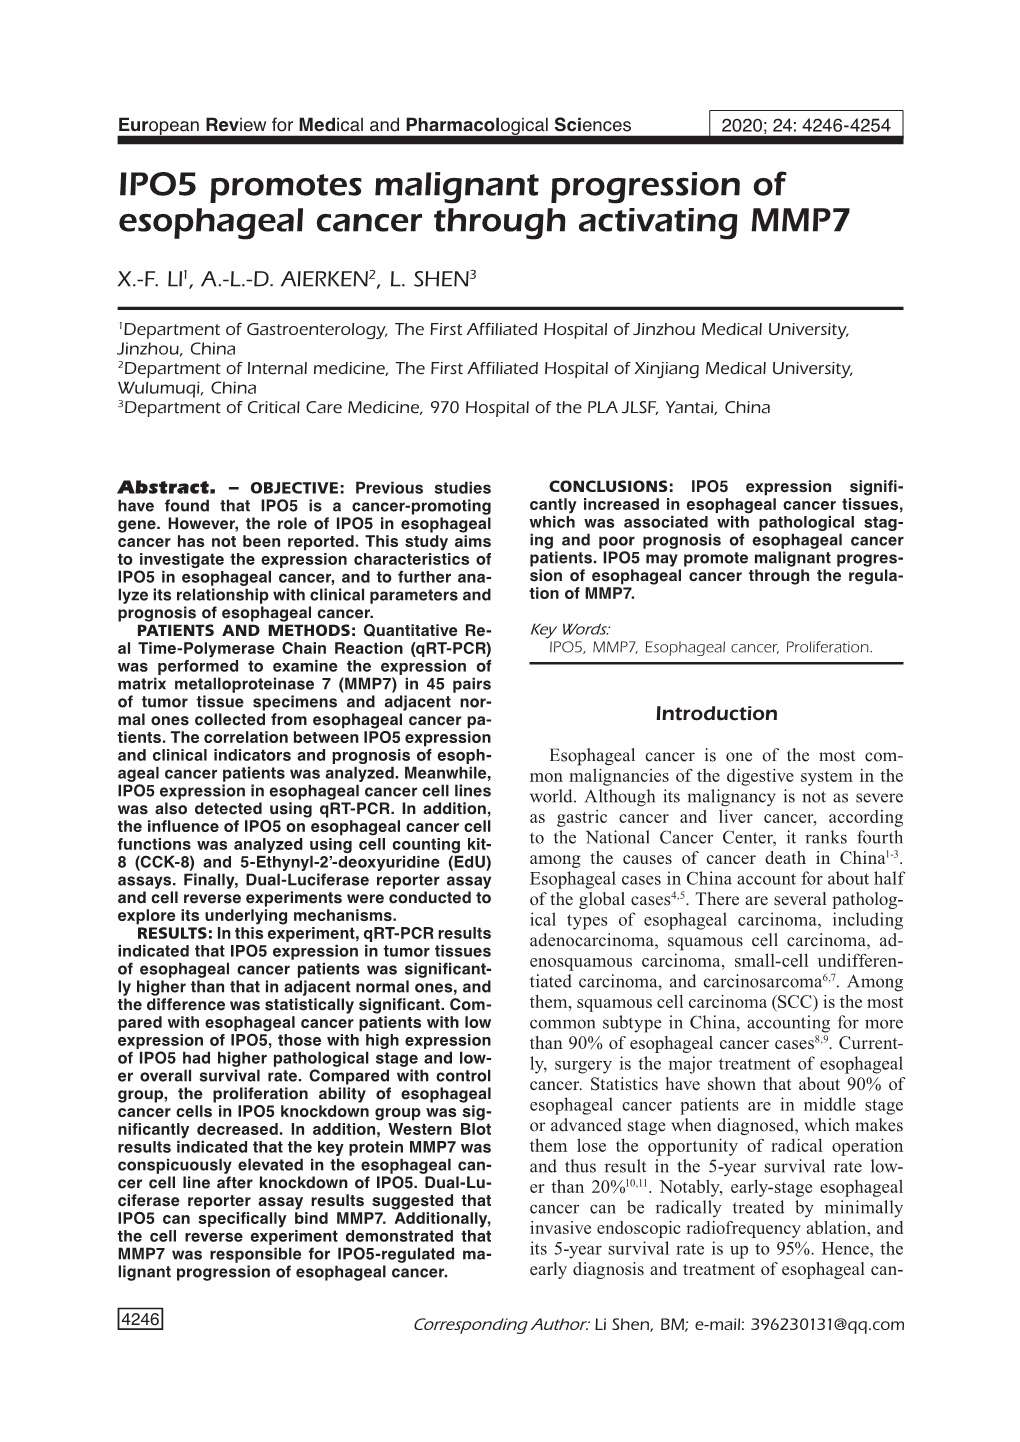 IPO5 Promotes Malignant Progression of Esophageal Cancer Through Activating MMP7